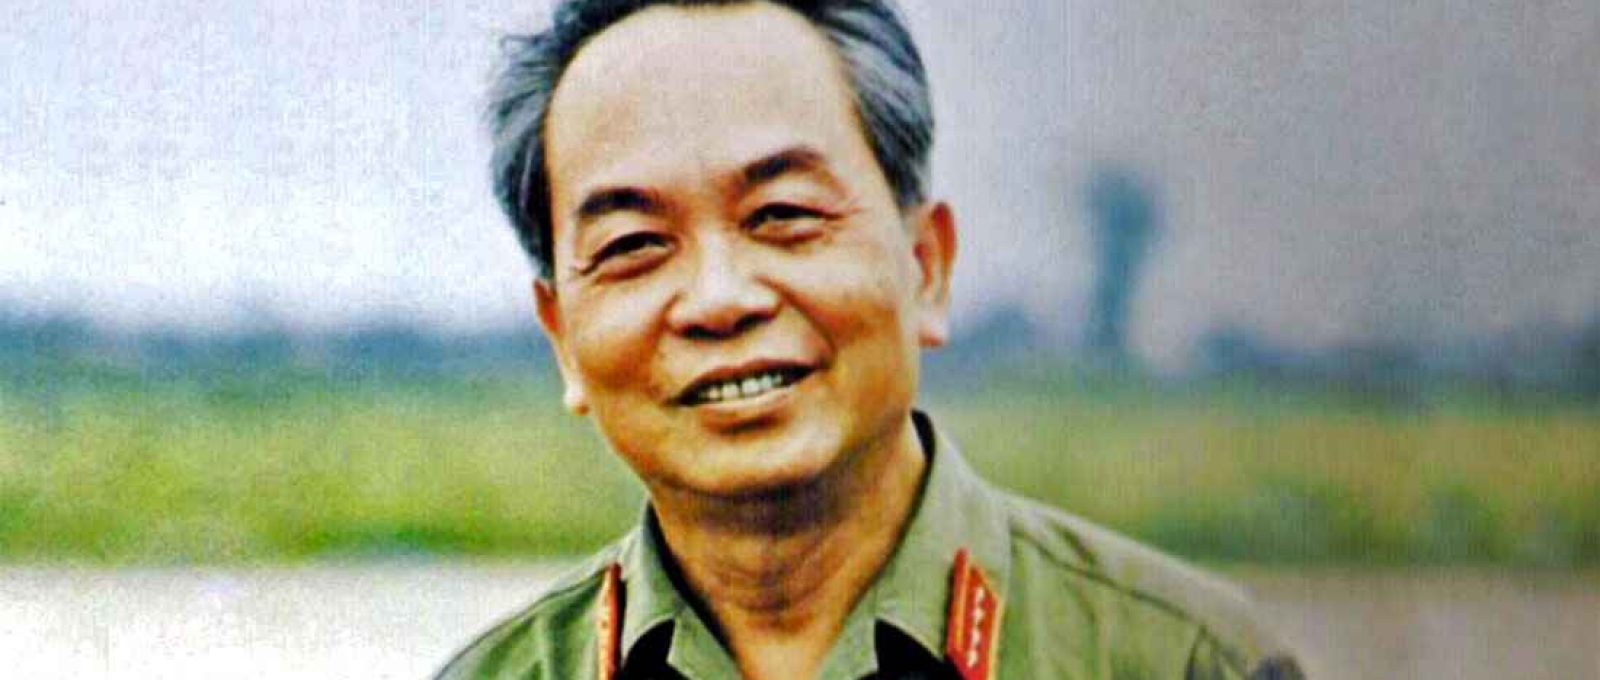 Vo Nguyen Giap (1911-2013) (Universal History Archive/Universal Images Group via Getty Images).